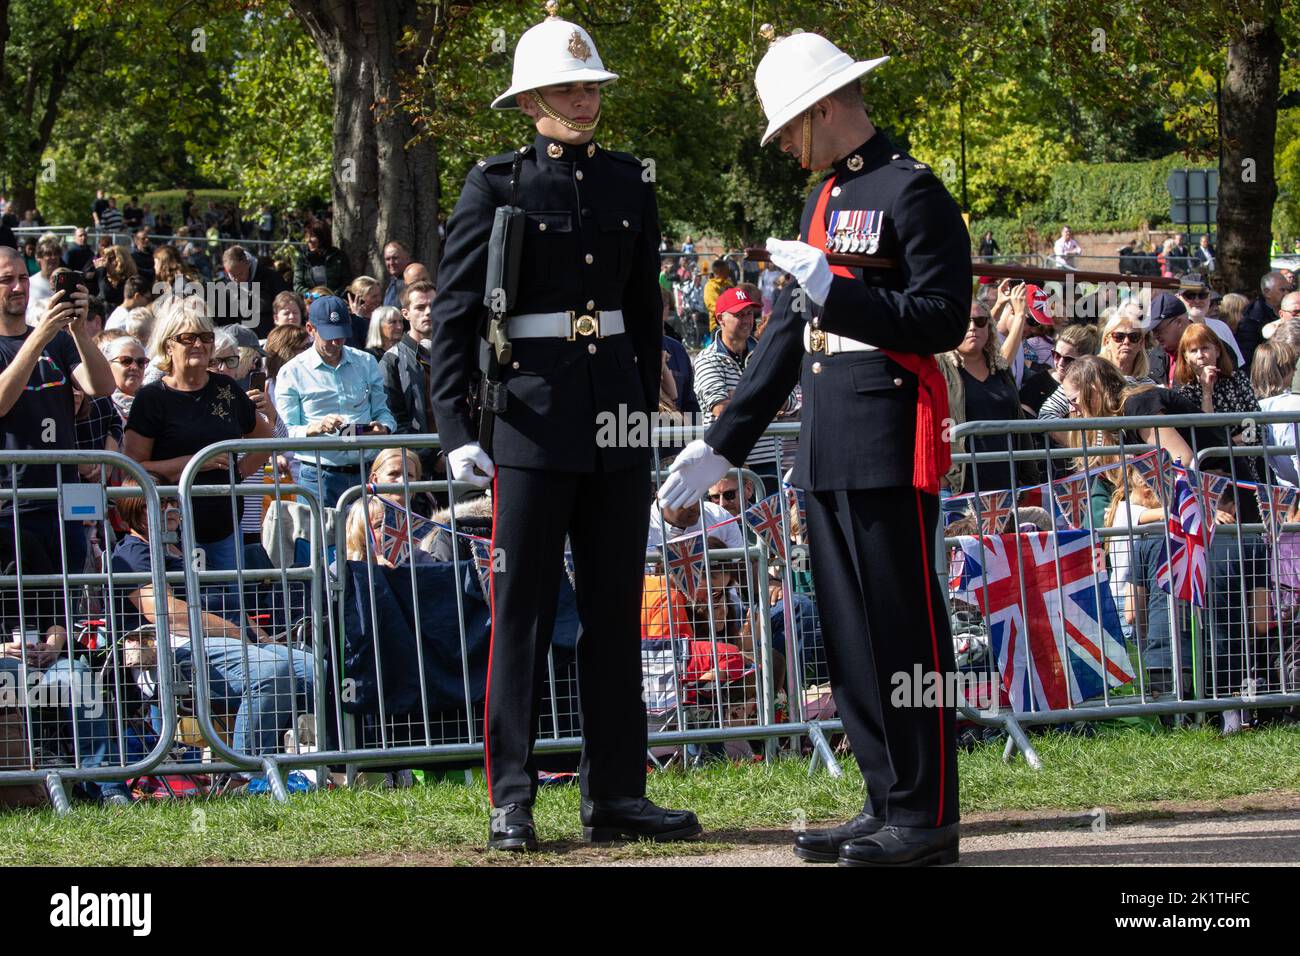 Windsor, UK. 19th September, 2022. A Royal Marine is inspected by an officer on the Long Walk in Windsor Great Park prior to the procession of Queen Elizabeth II's coffin in the State Hearse to St George’s Chapel for the Committal Service. Queen Elizabeth II, the UK's longest-serving monarch, died at Balmoral aged 96 on 8th September 2022 after a reign lasting 70 years. Credit: Mark Kerrison/Alamy Live News Stock Photo